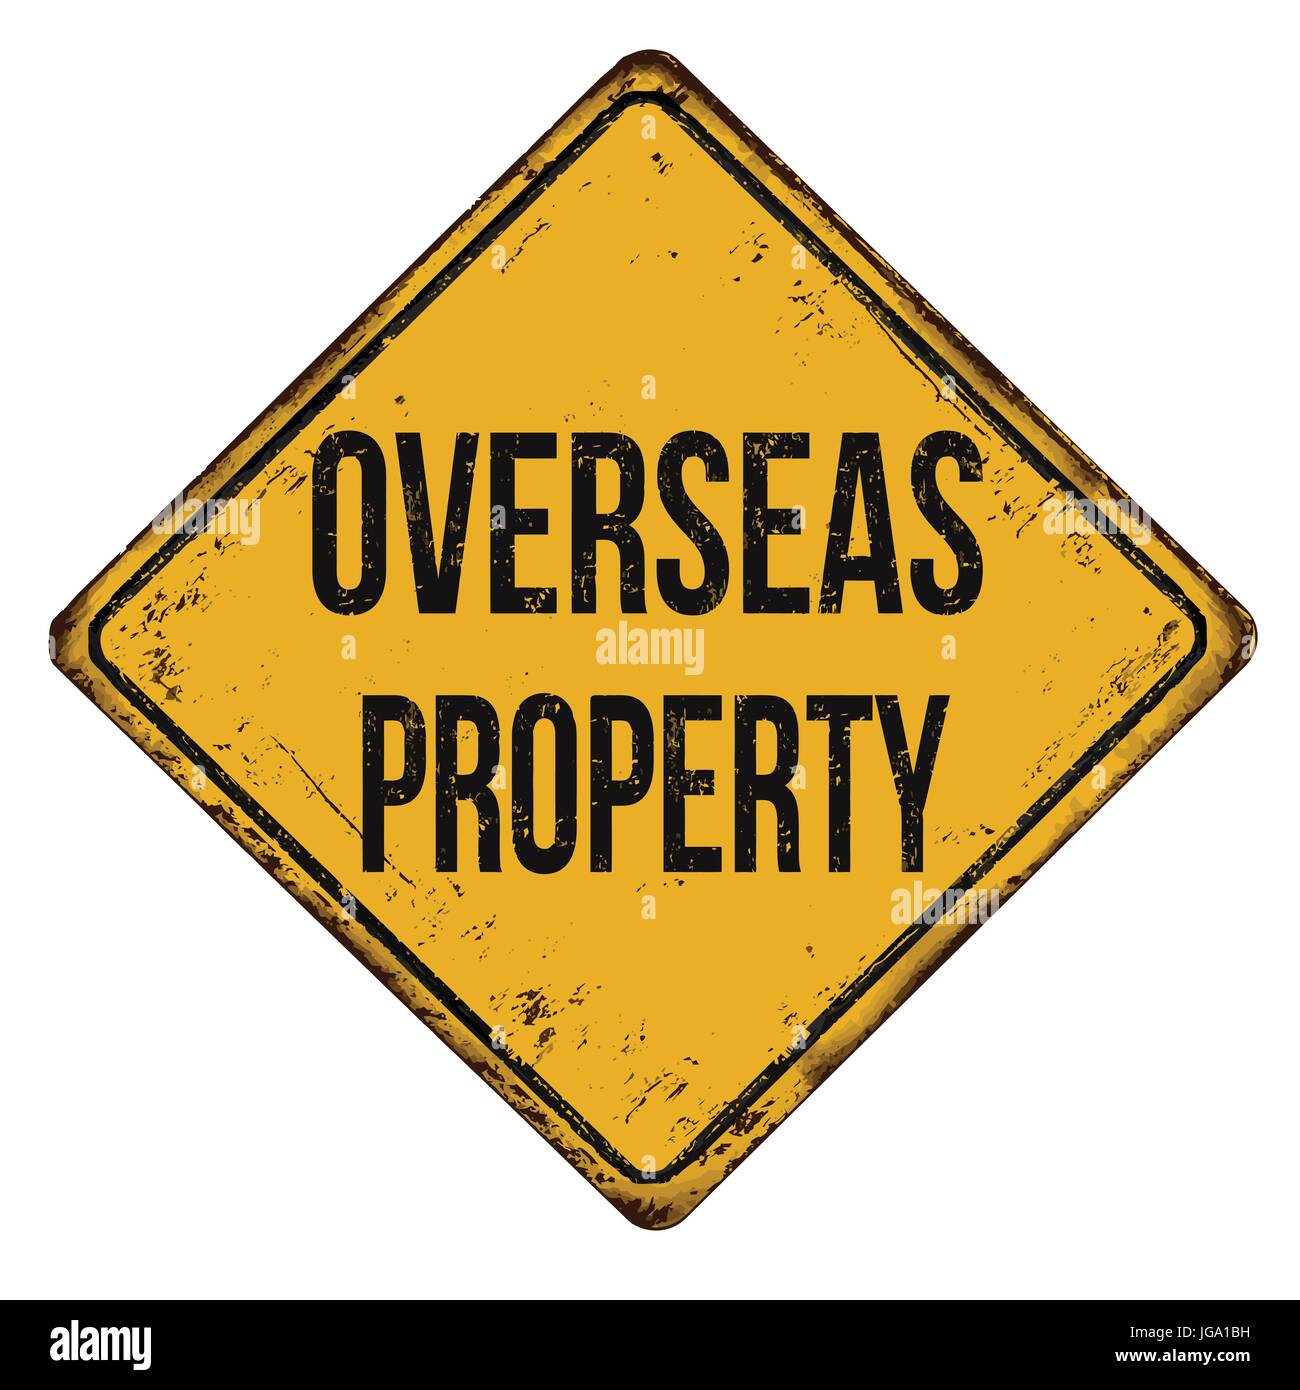 Overseas property vintage rusty metal sign on a white background, vector illustration Stock Vector